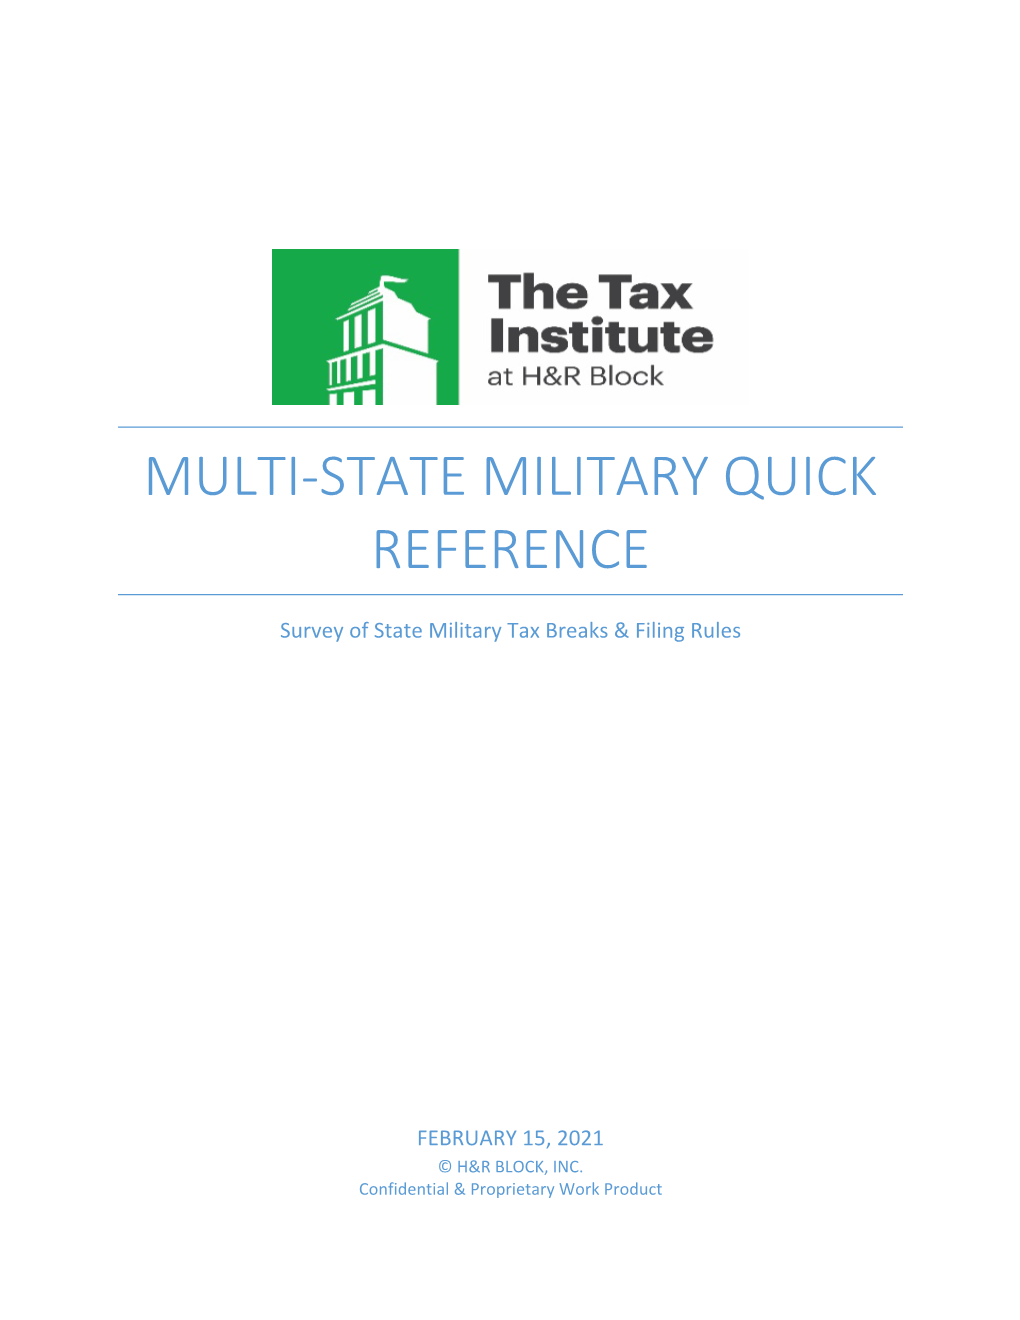 Multi-State Military Quick Reference